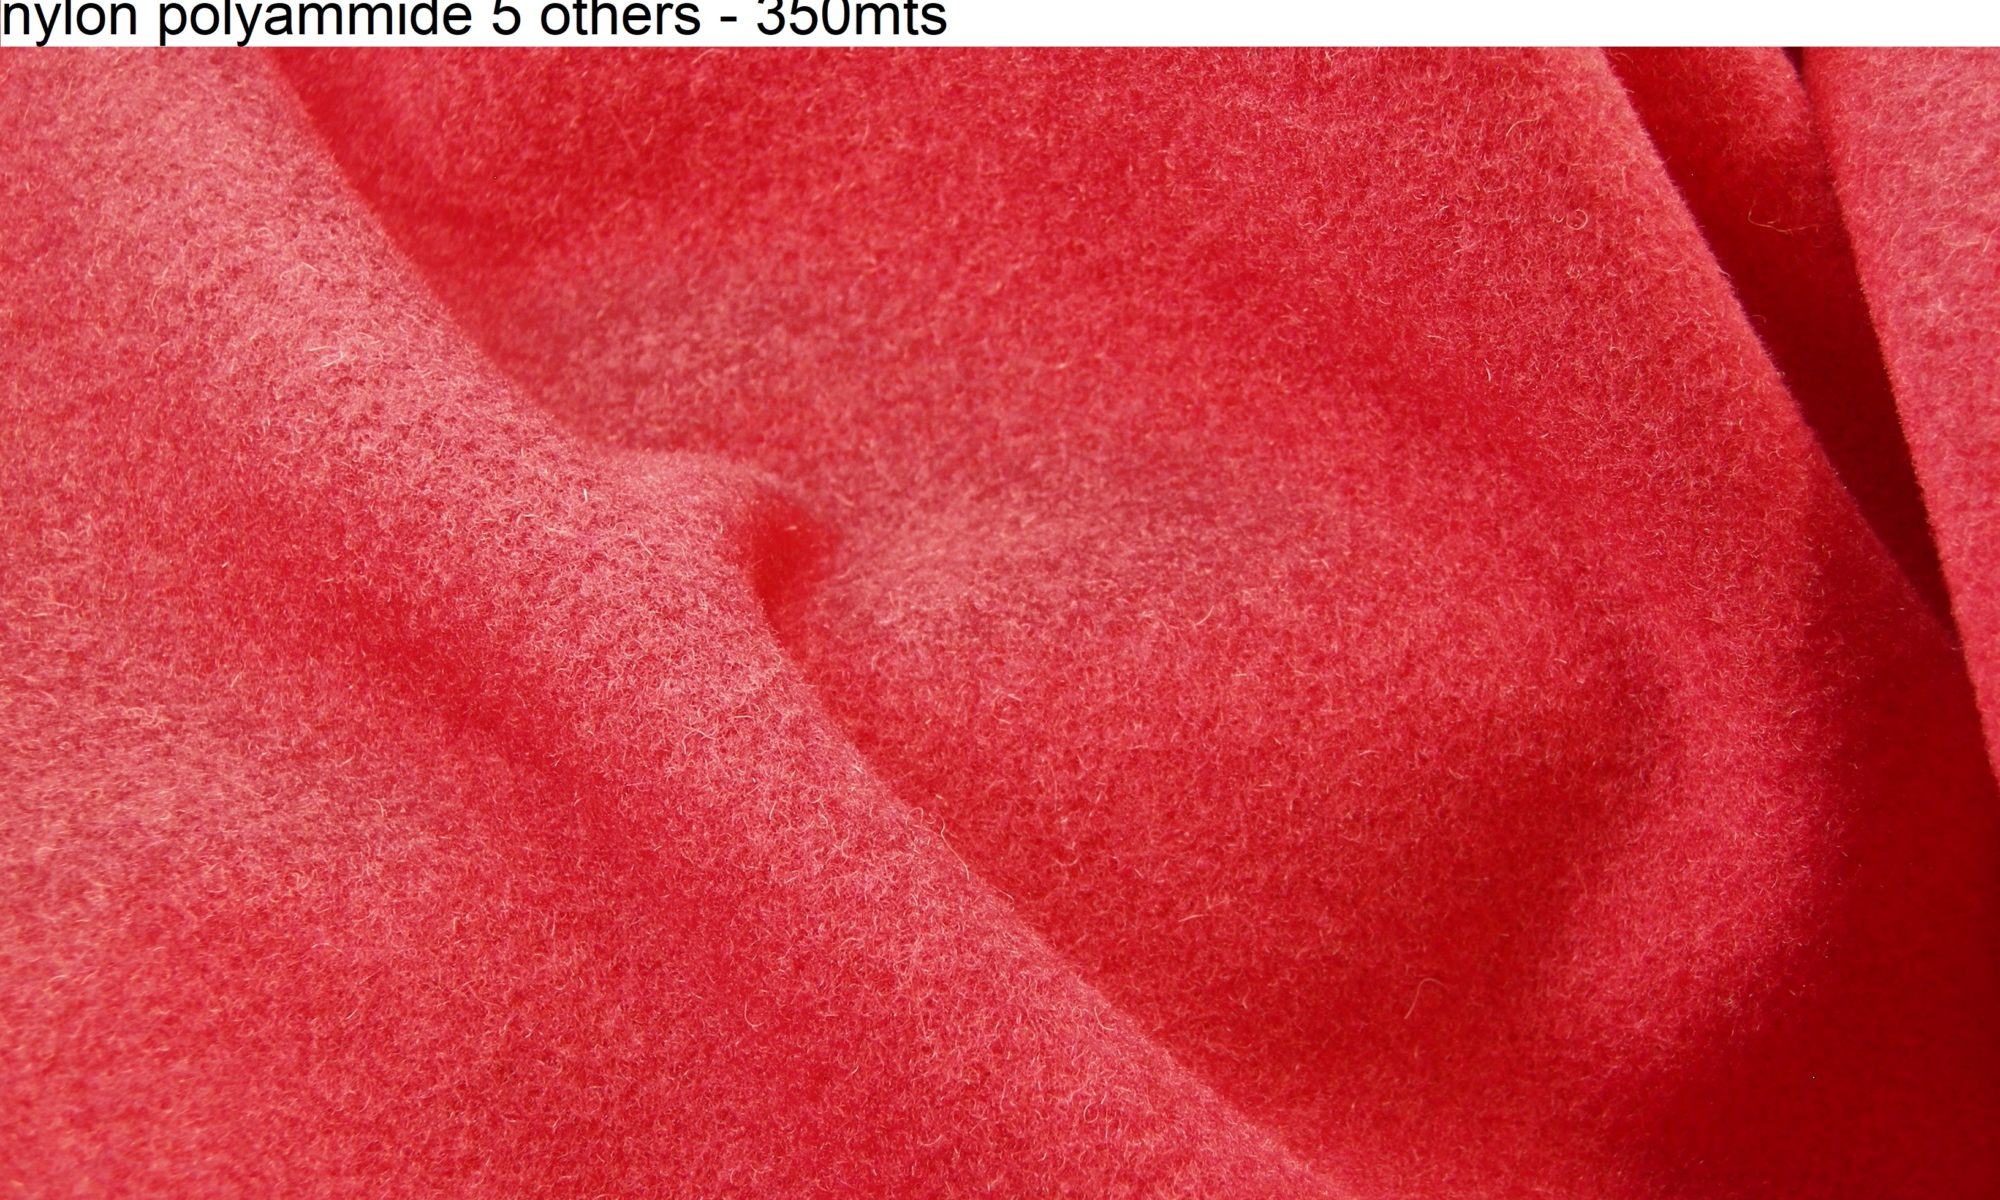 ART 7398 fuchsia velour beaver plush wool coat fashion fabric WIDTH cm150 WEIGHT gr540 - gr360 square meter - COMPOSITION 70 wool 25 nylon polyammide 5 others - 350mts